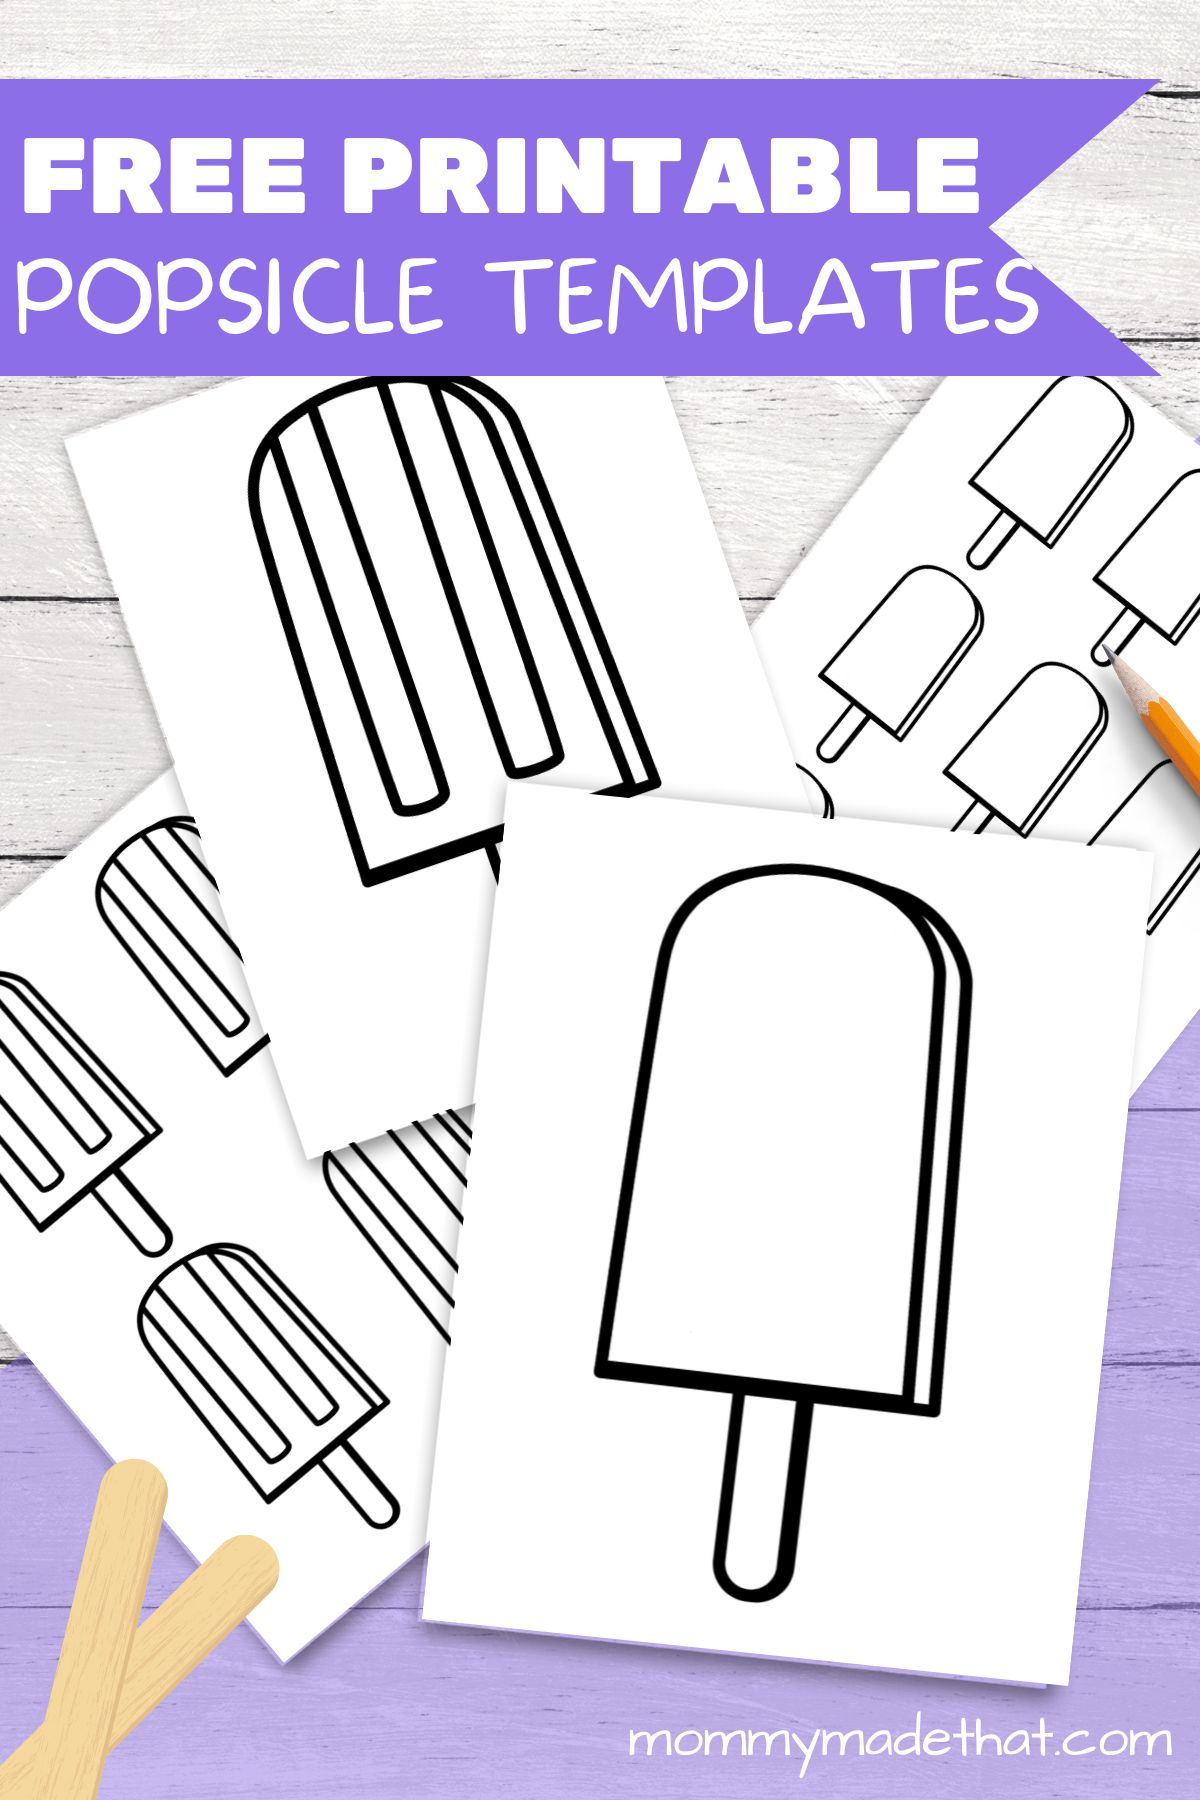 Free Printable Popsicle Templates (So Many Cute Ones!) throughout Free Printable Popsicle Template